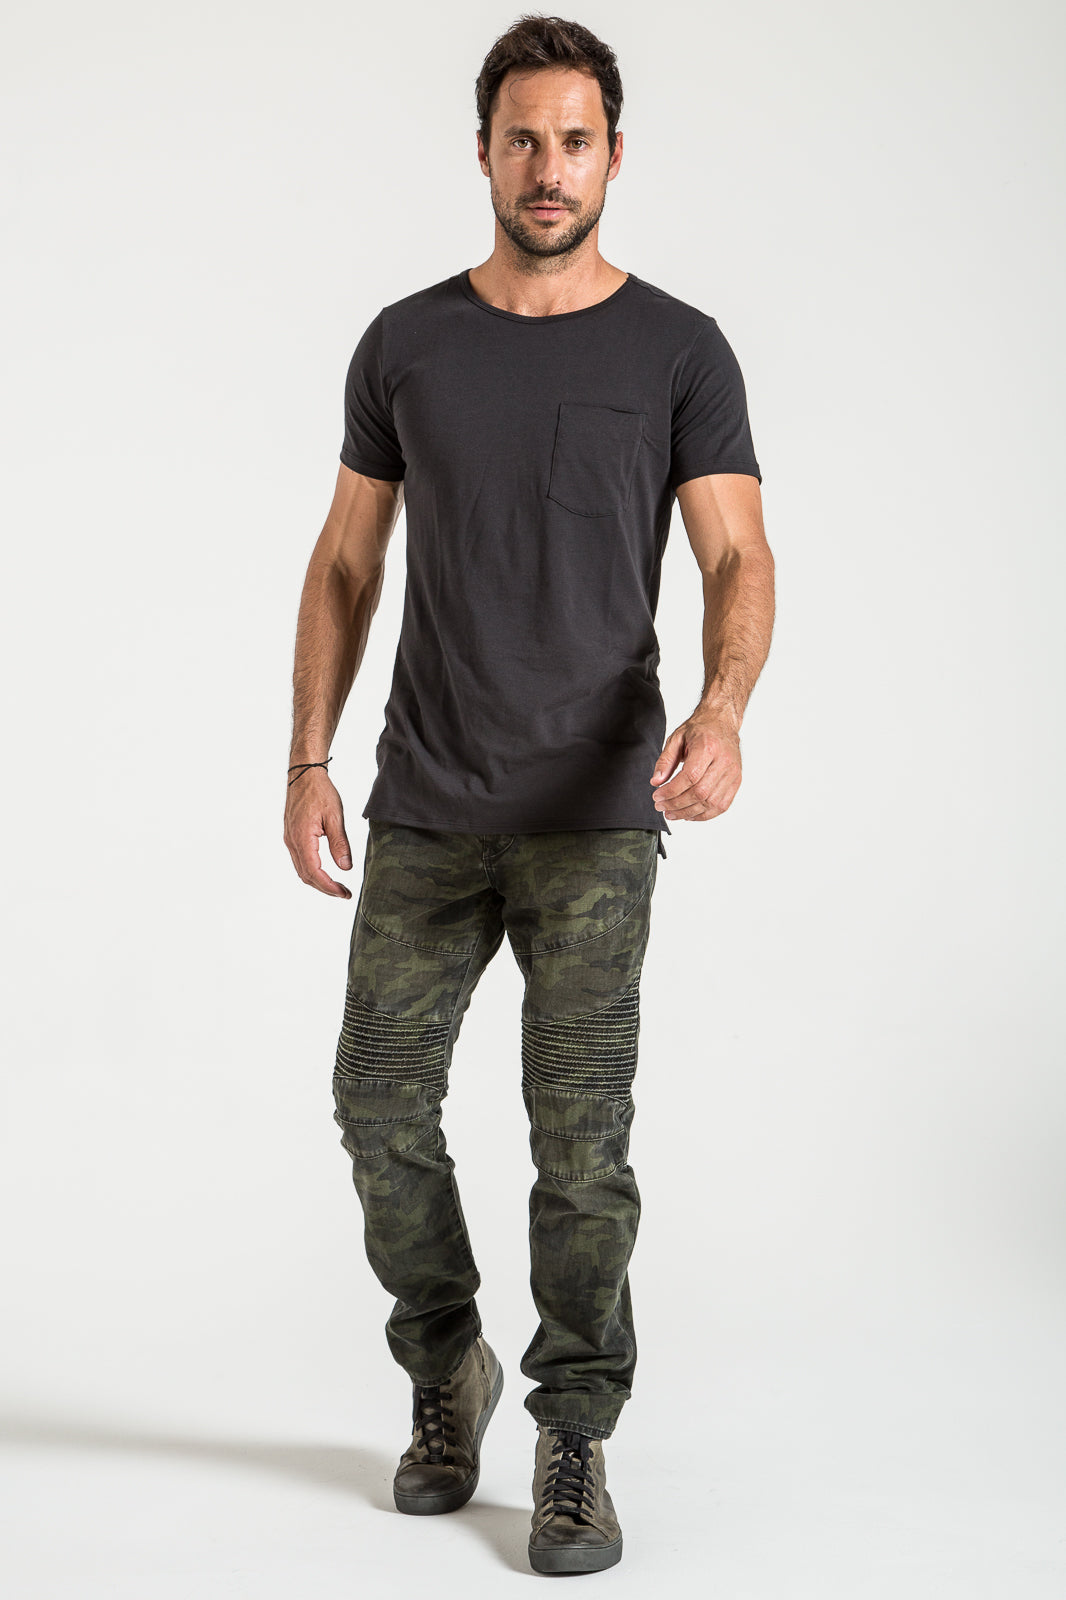 MOTO JEANS IN ARMY CAMO